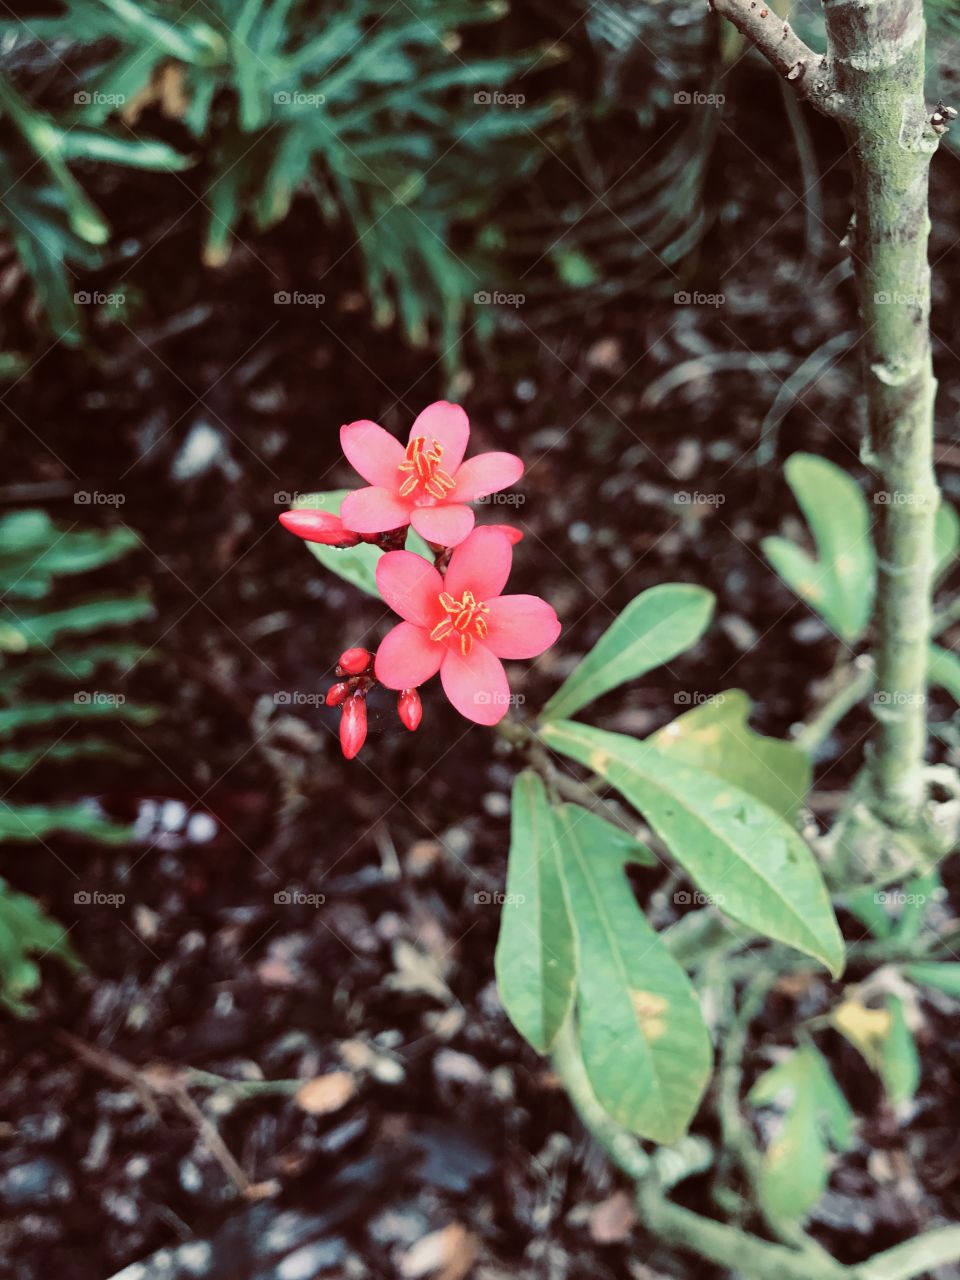 Is small red flower